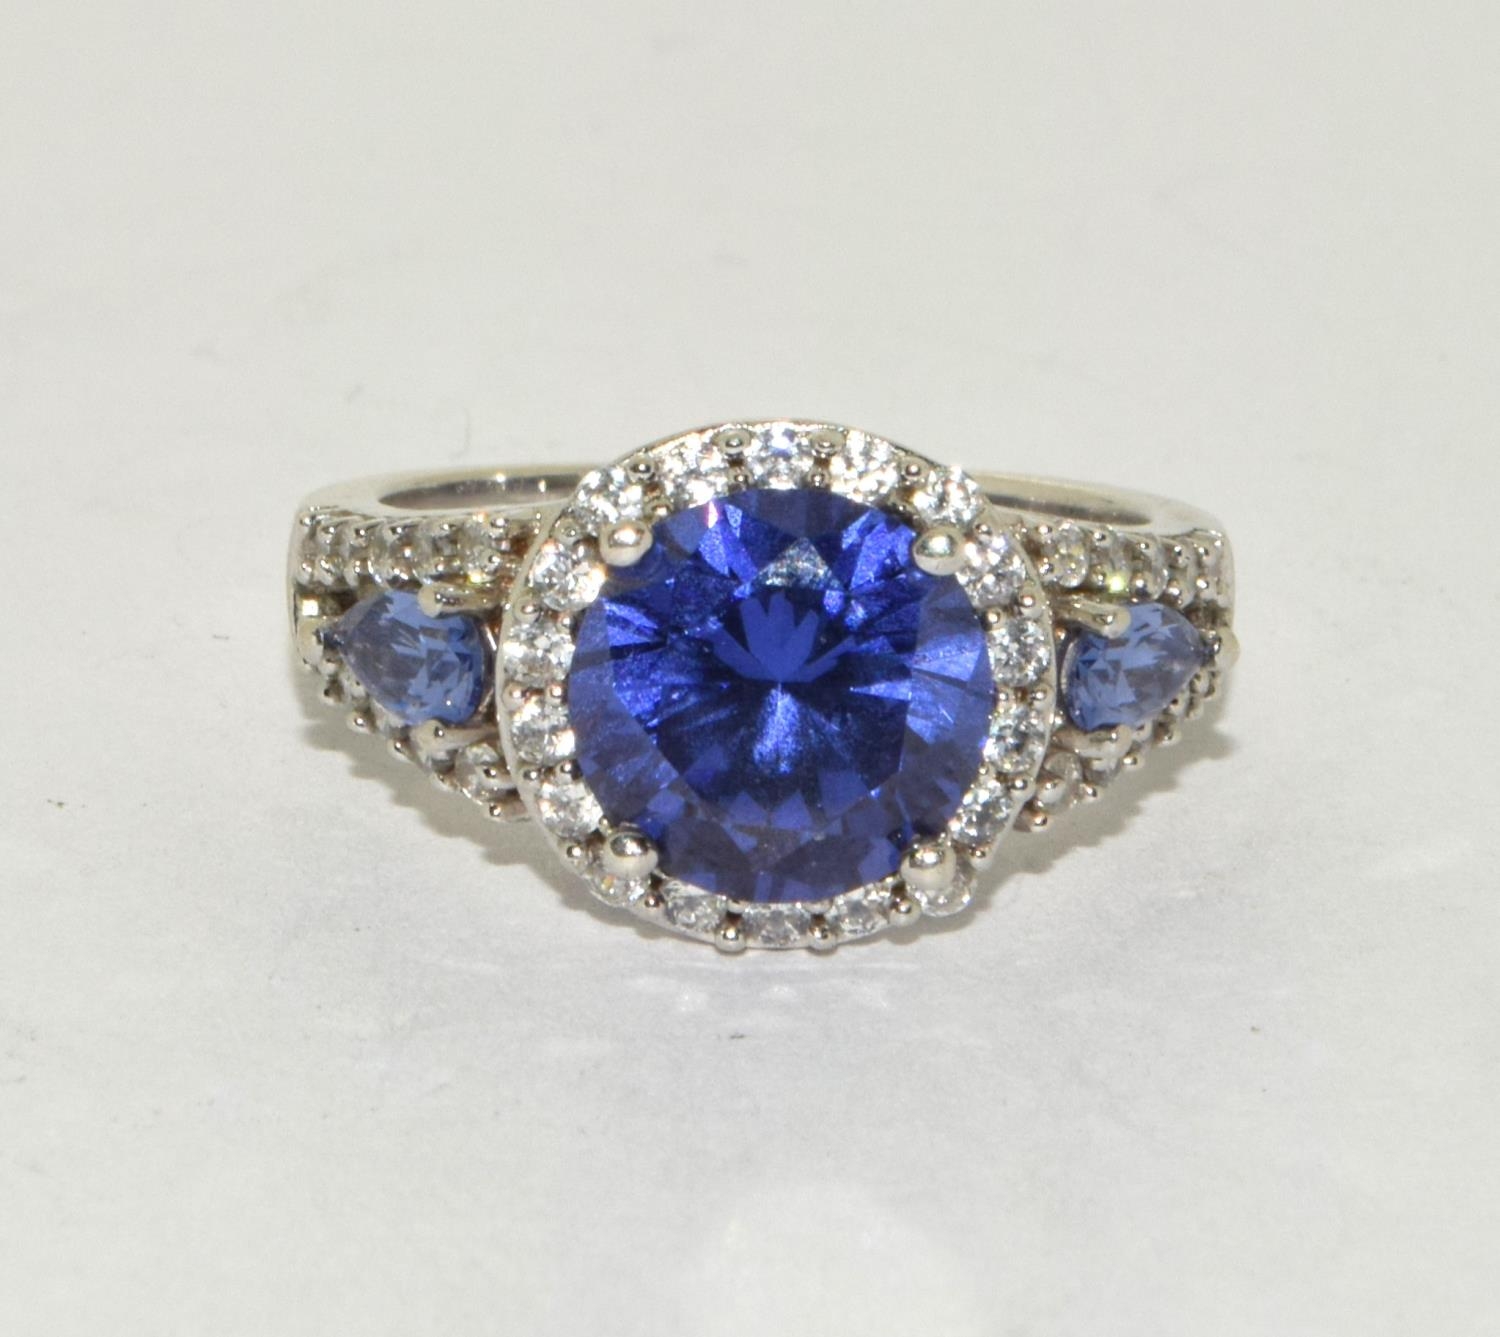 A stunning w/g on 925 silver DQCZ and tanzanite ring Size N